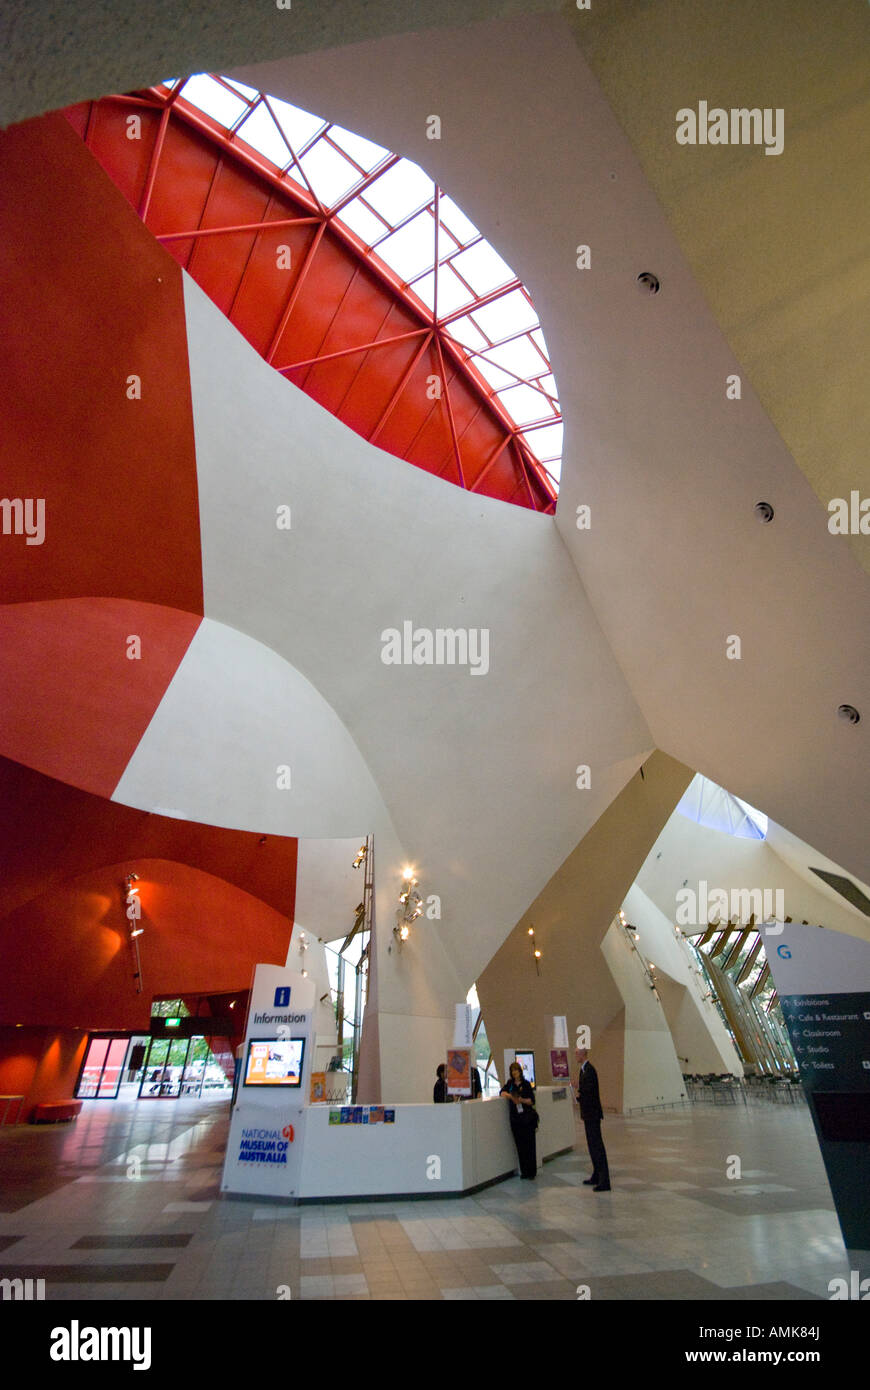 Interior of the National Museum of Australia in Canberra Stock Photo